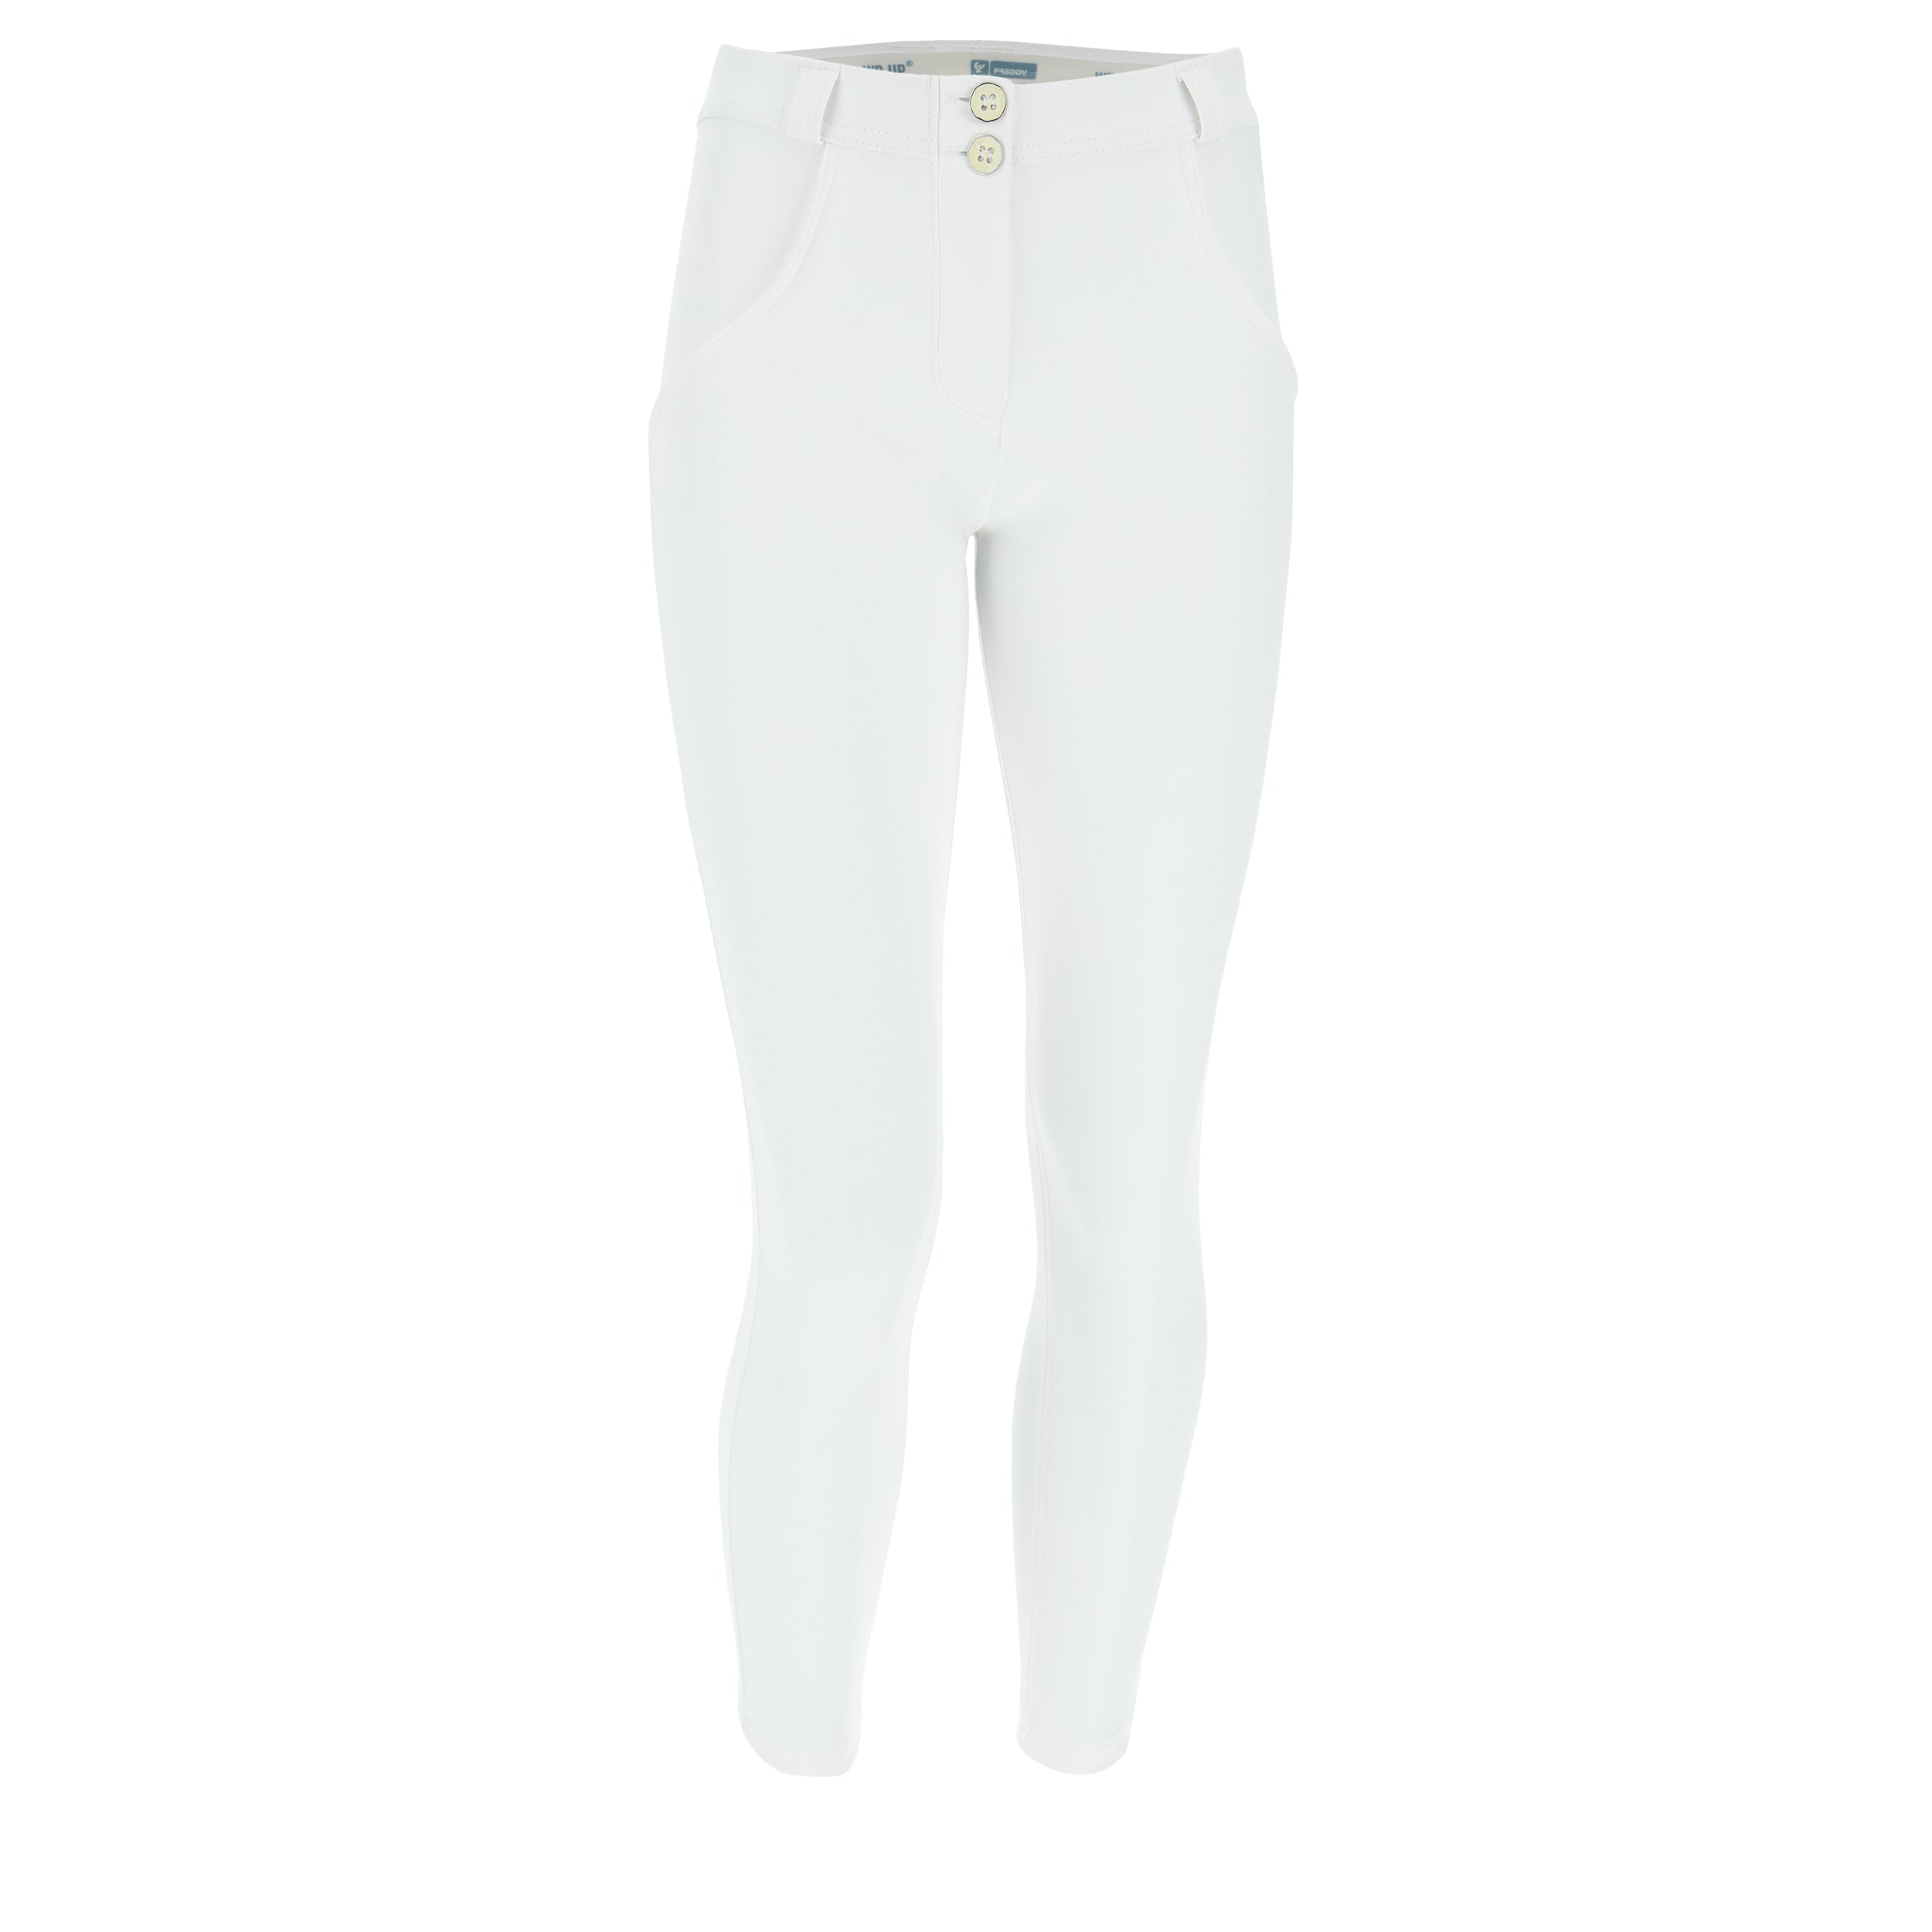 freddy shaping push up shapewear faux leather nep leer broek legging comfy stretch fitting enkel lengte trend white wit